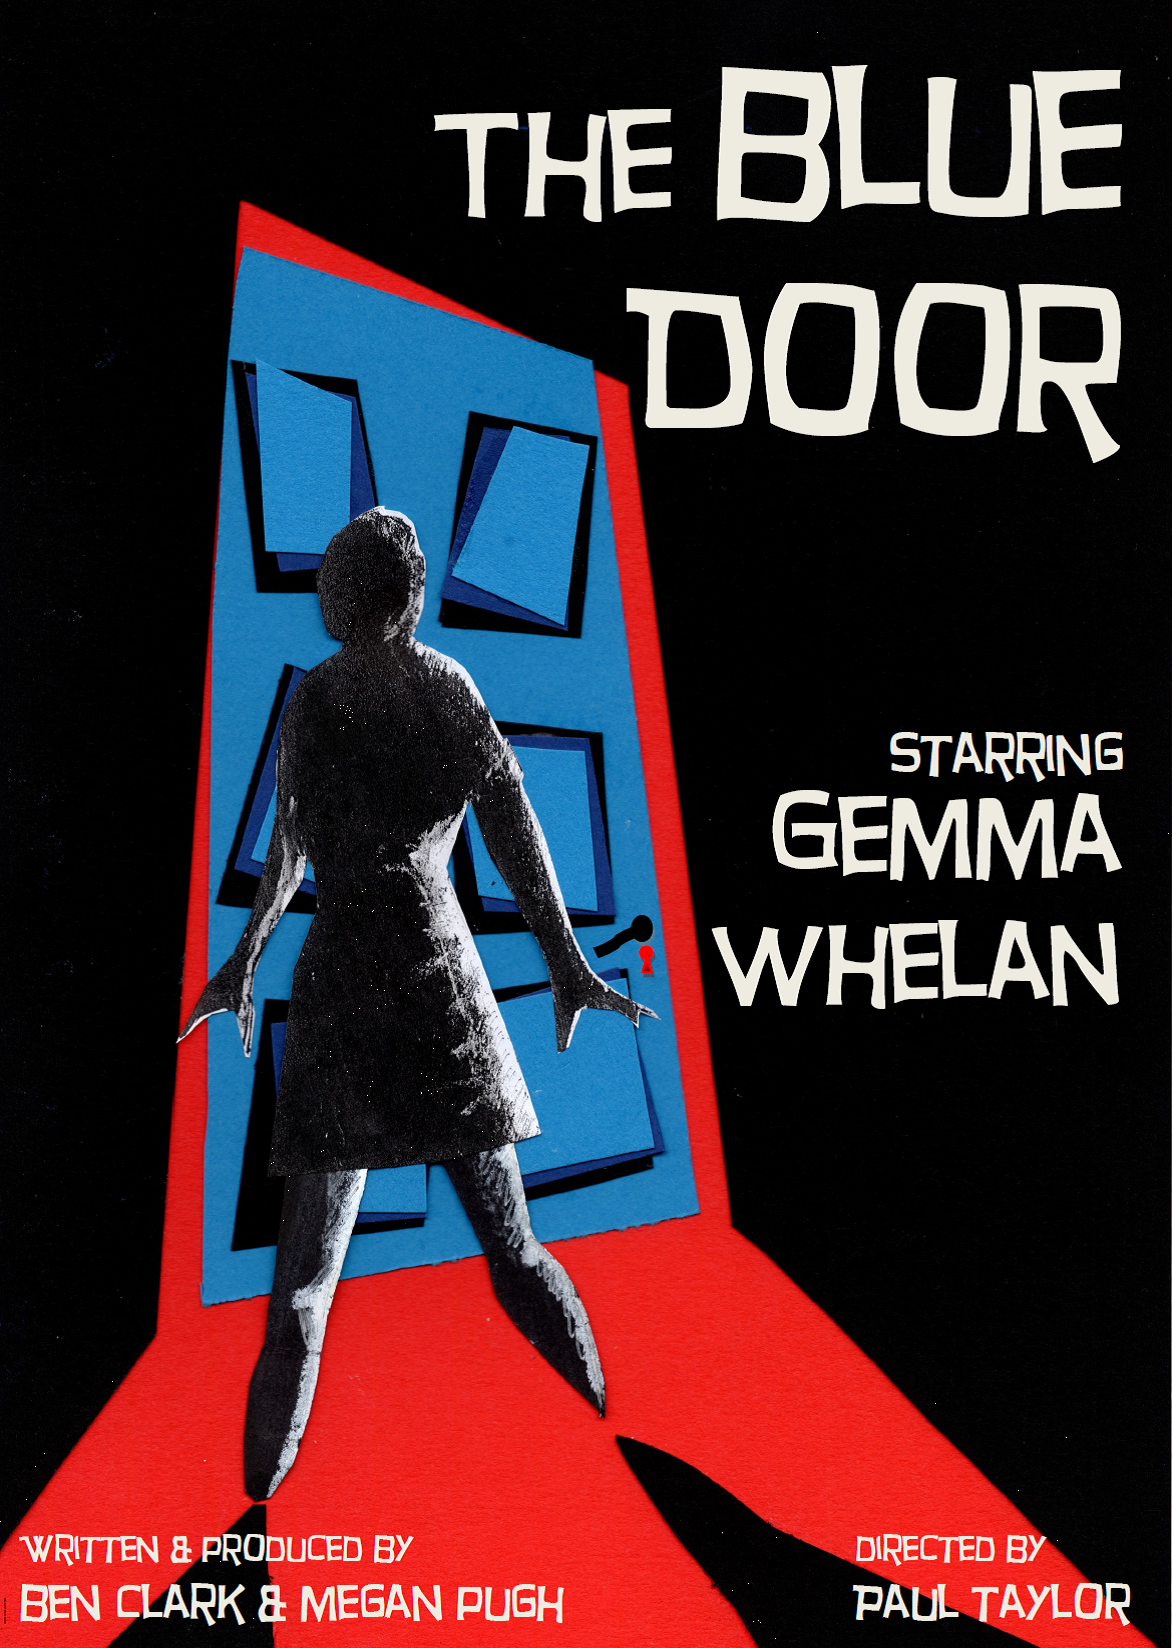 The Blue Door Poster Pic.png